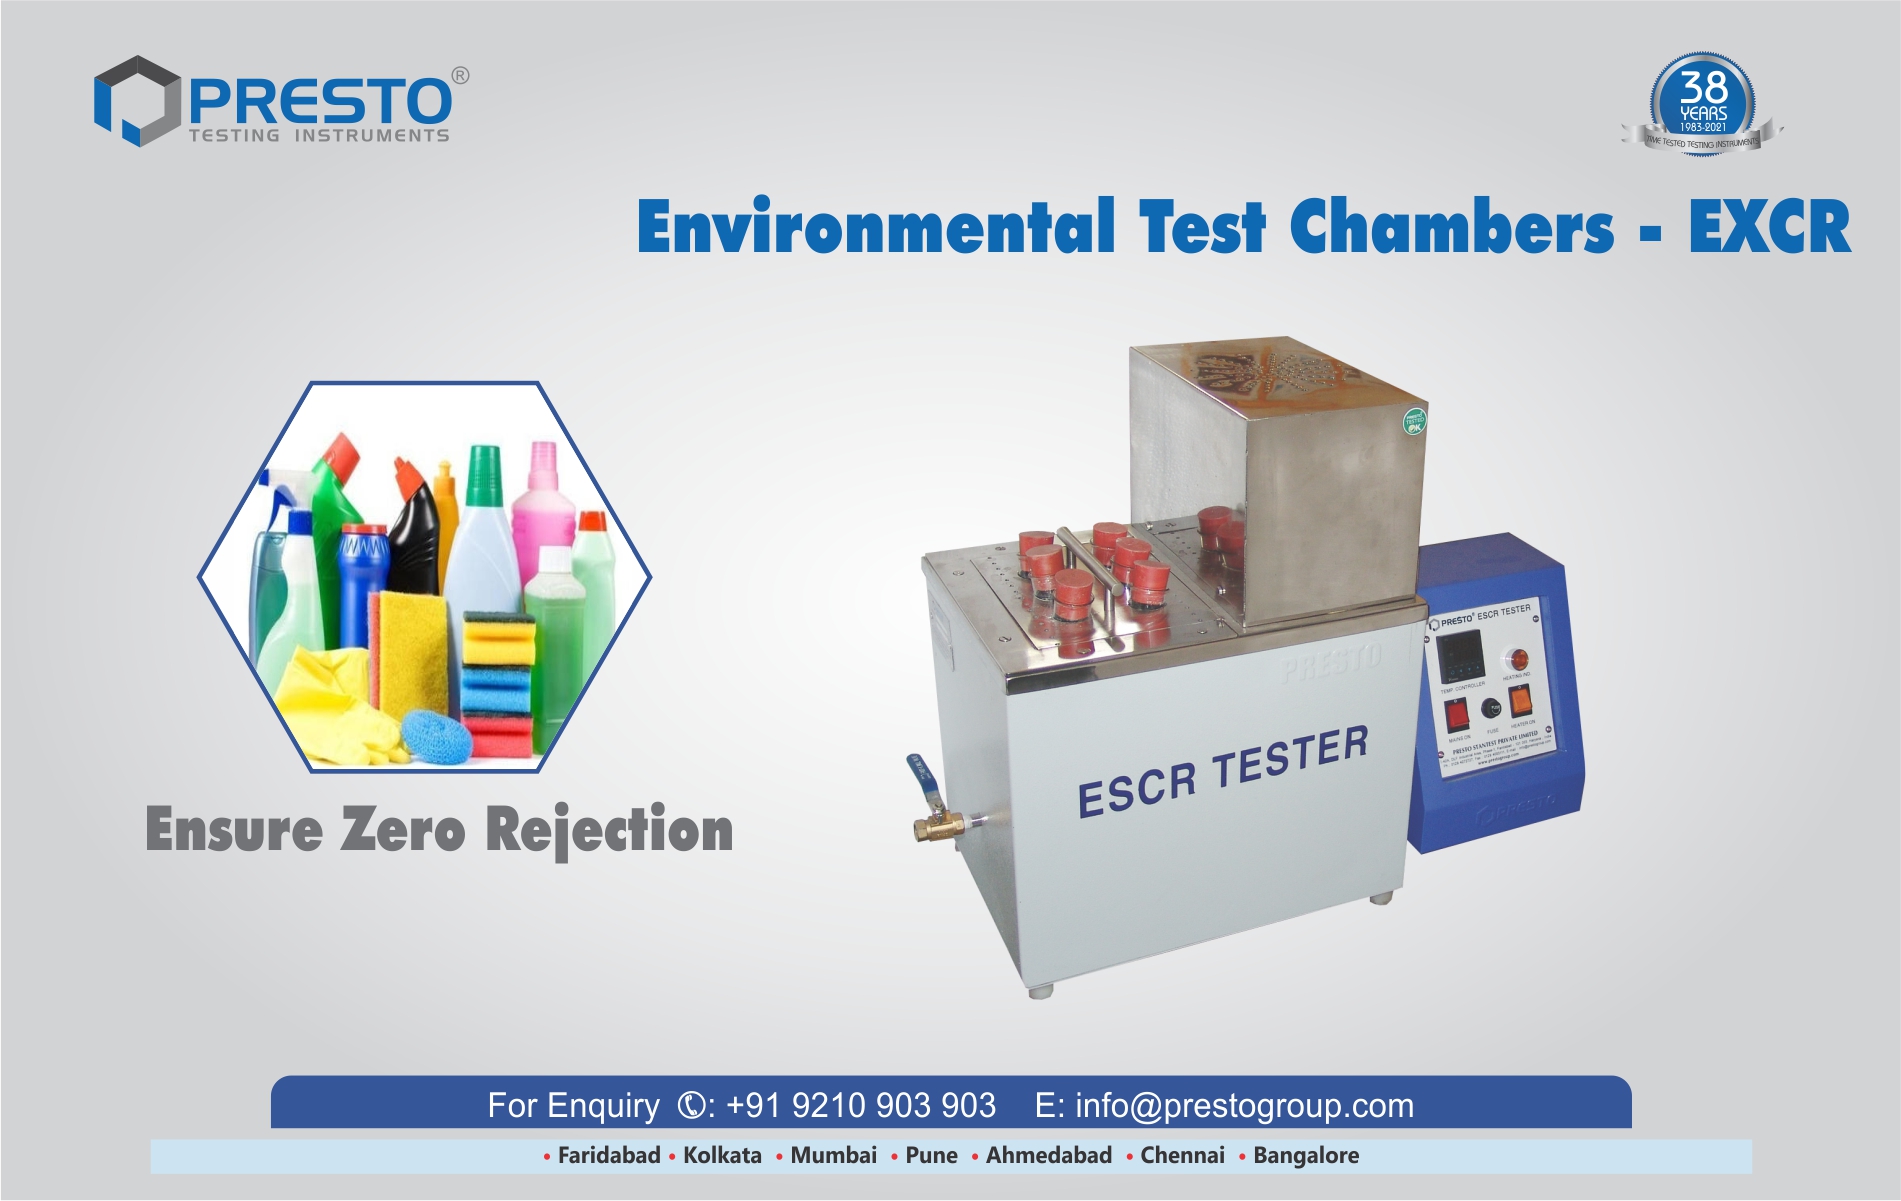 Significance of Environmental Test Chambers